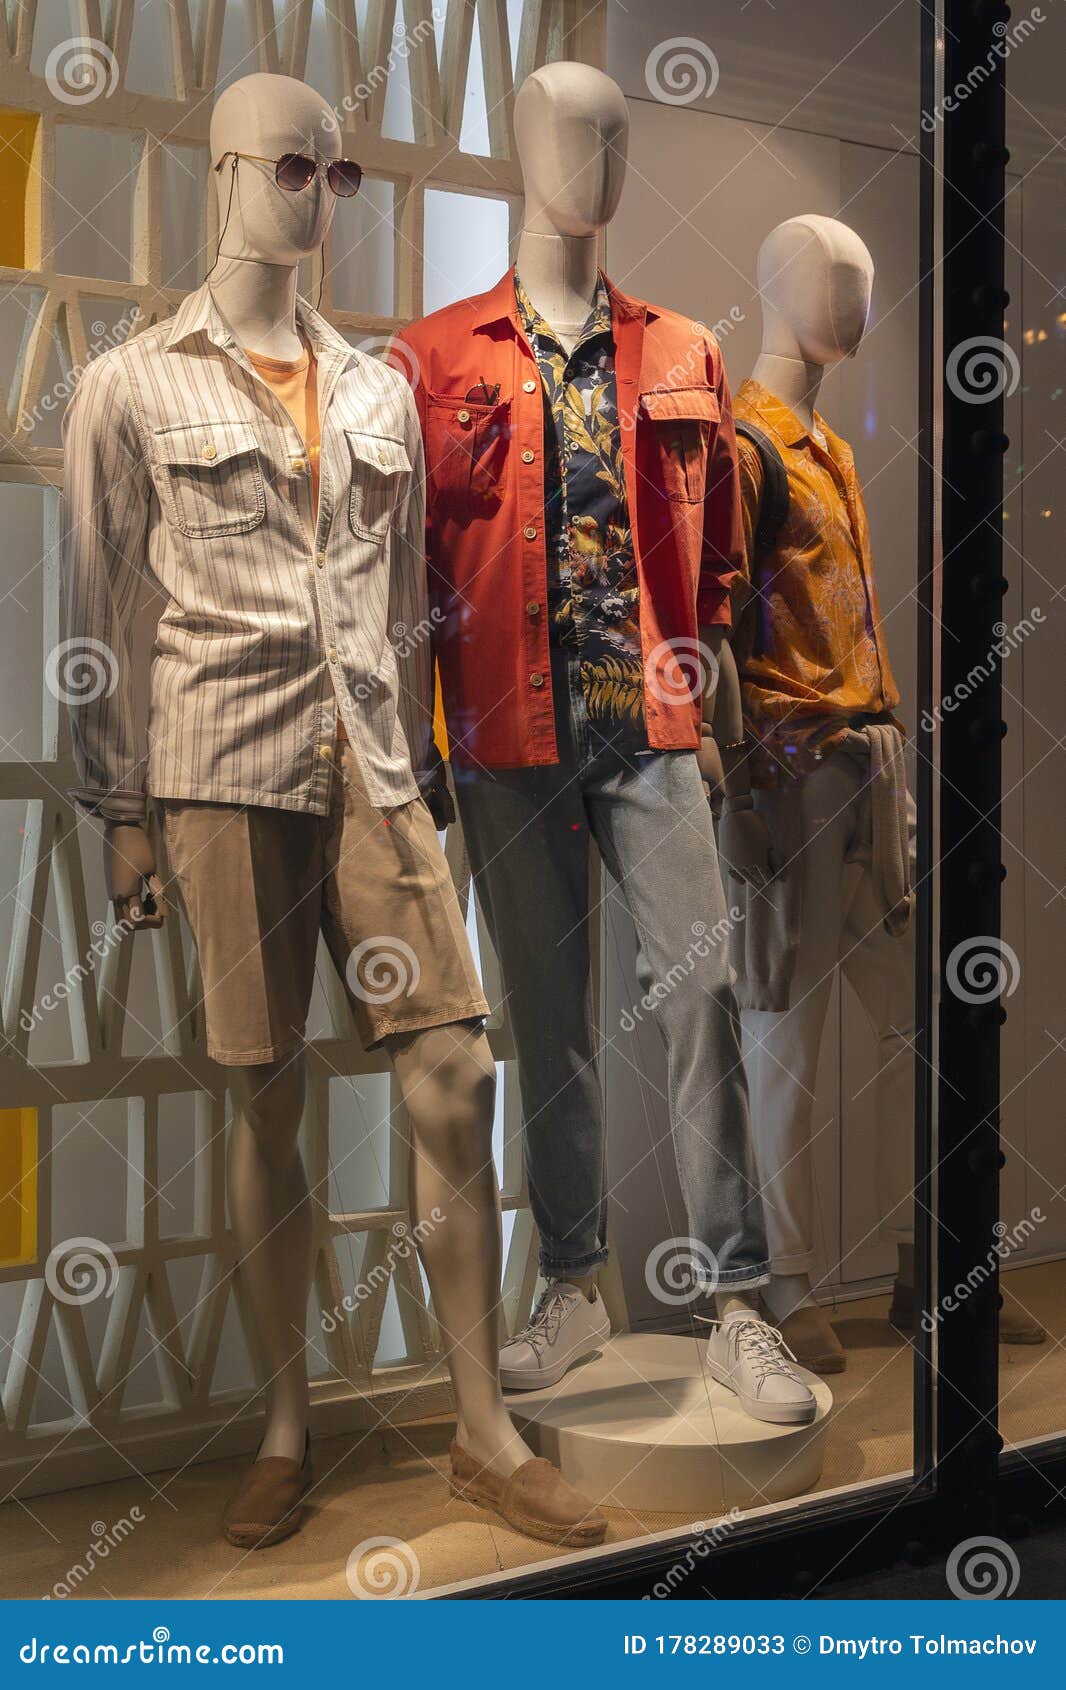 Male Mannequins in Elegant Clothes in a Shop Window Stock Image - Image ...